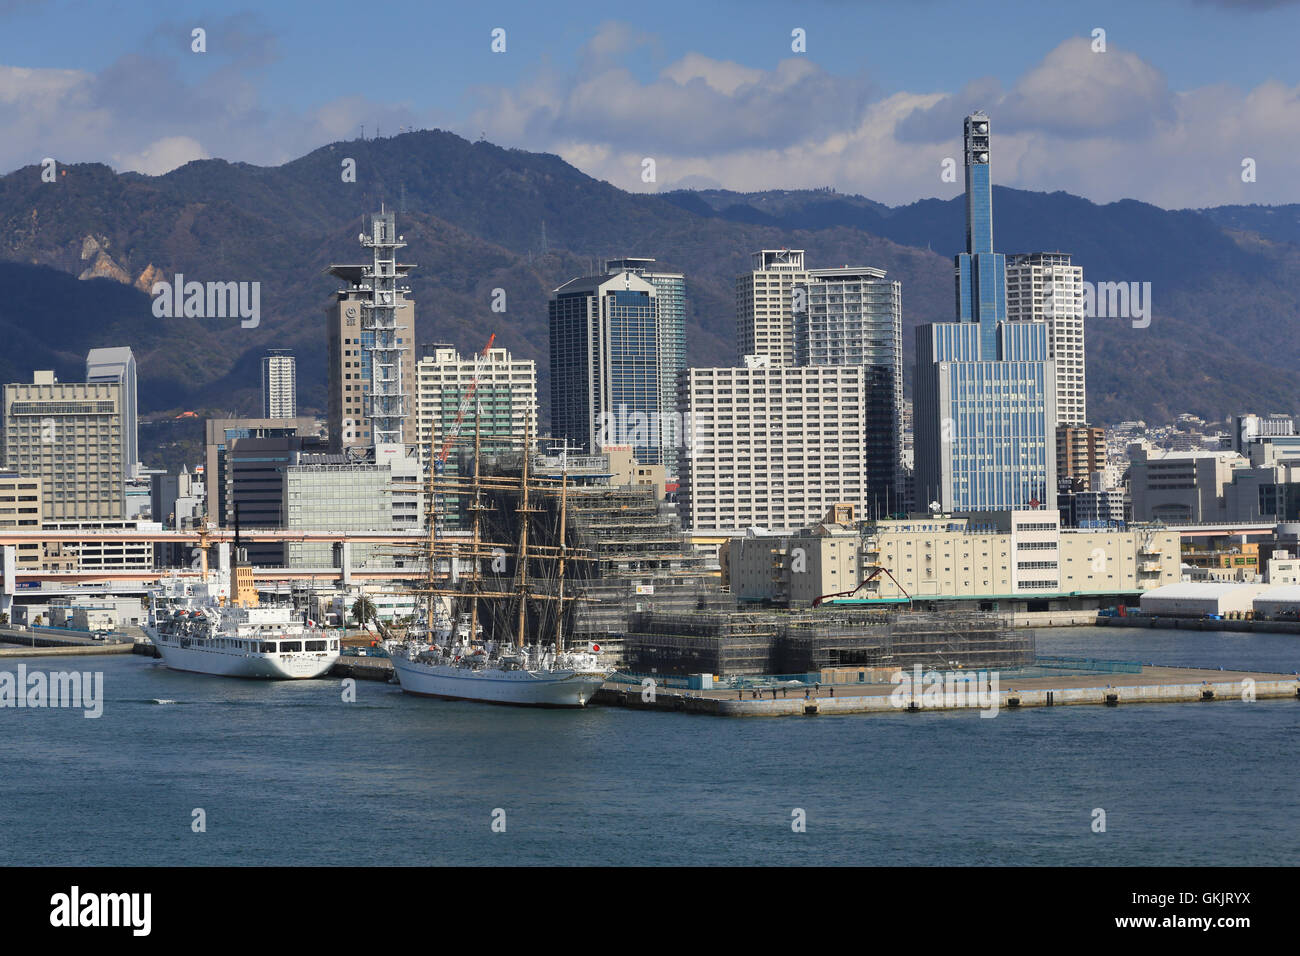 Picturesque mountains and city skyline at the Port of Kobe, Japan. Stock Photo